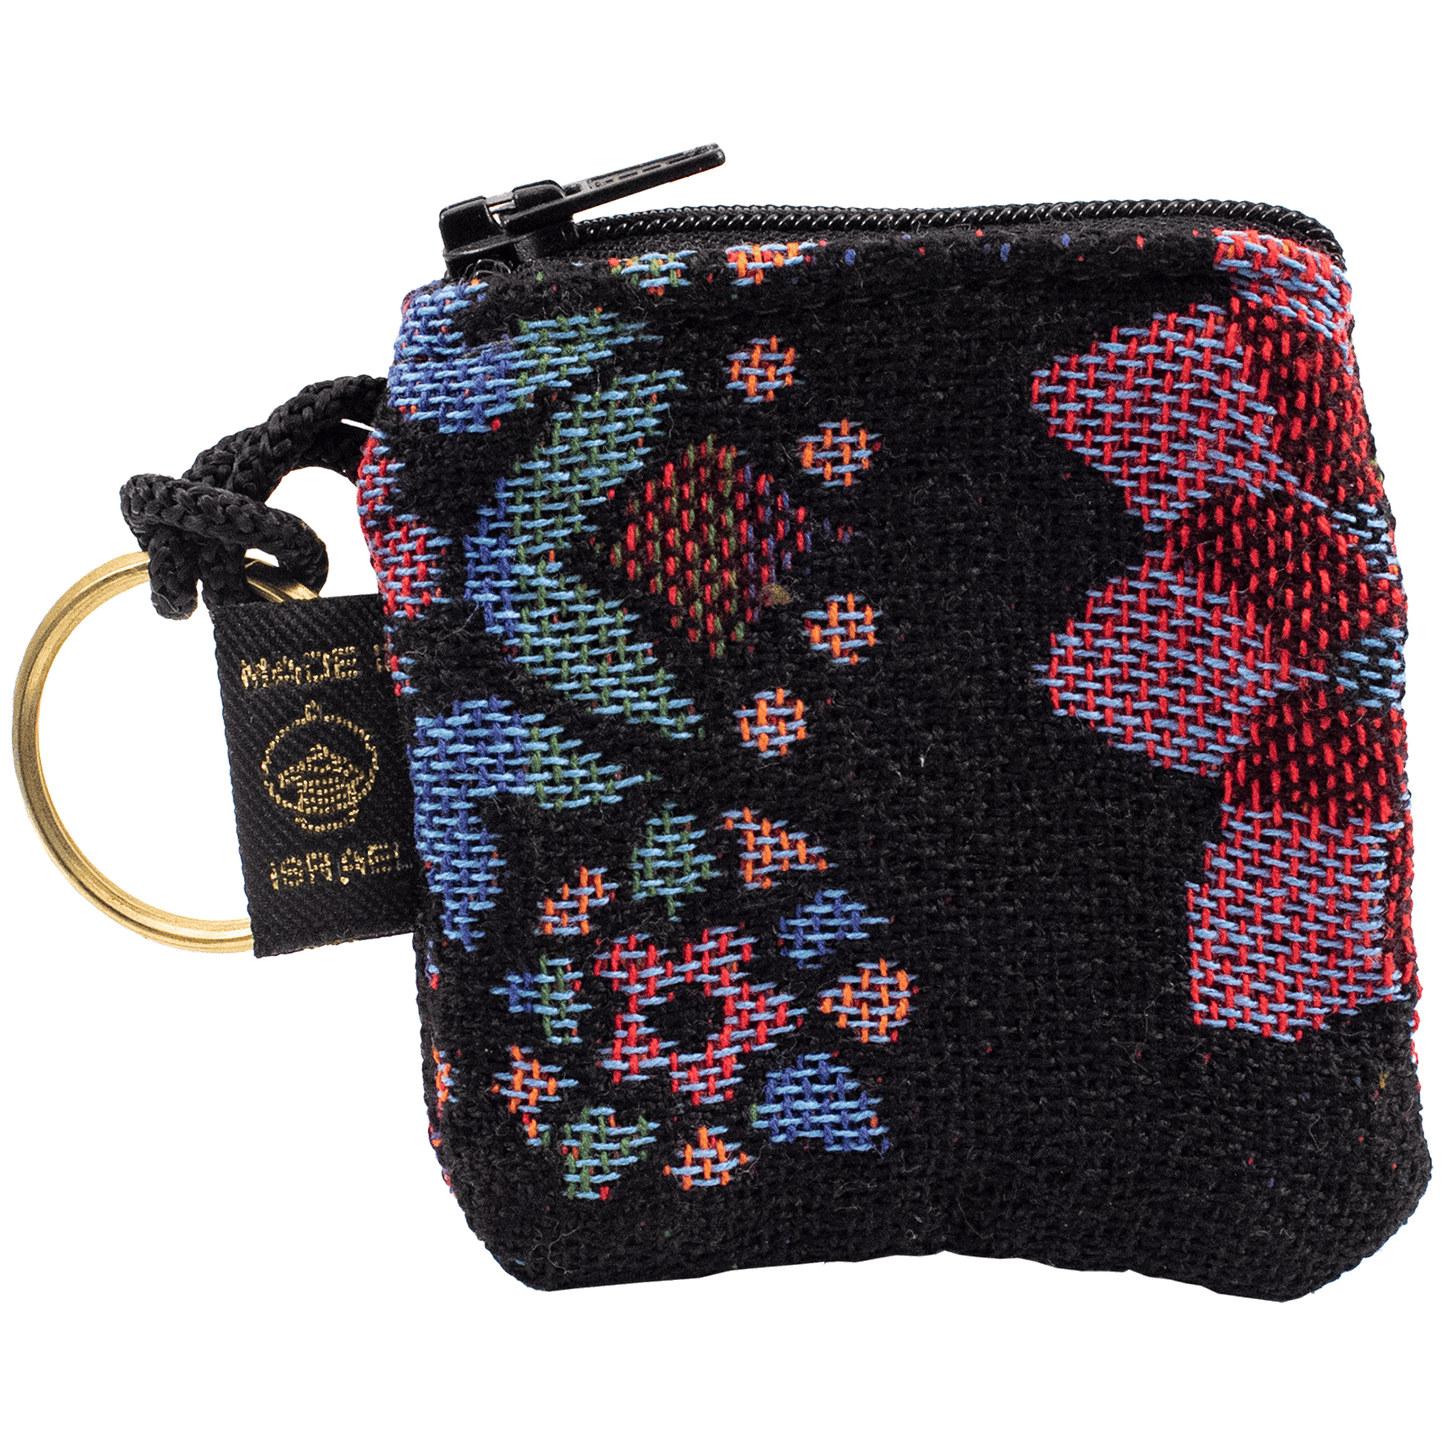 Keychain Change Purse Black with vibrant floral pattern